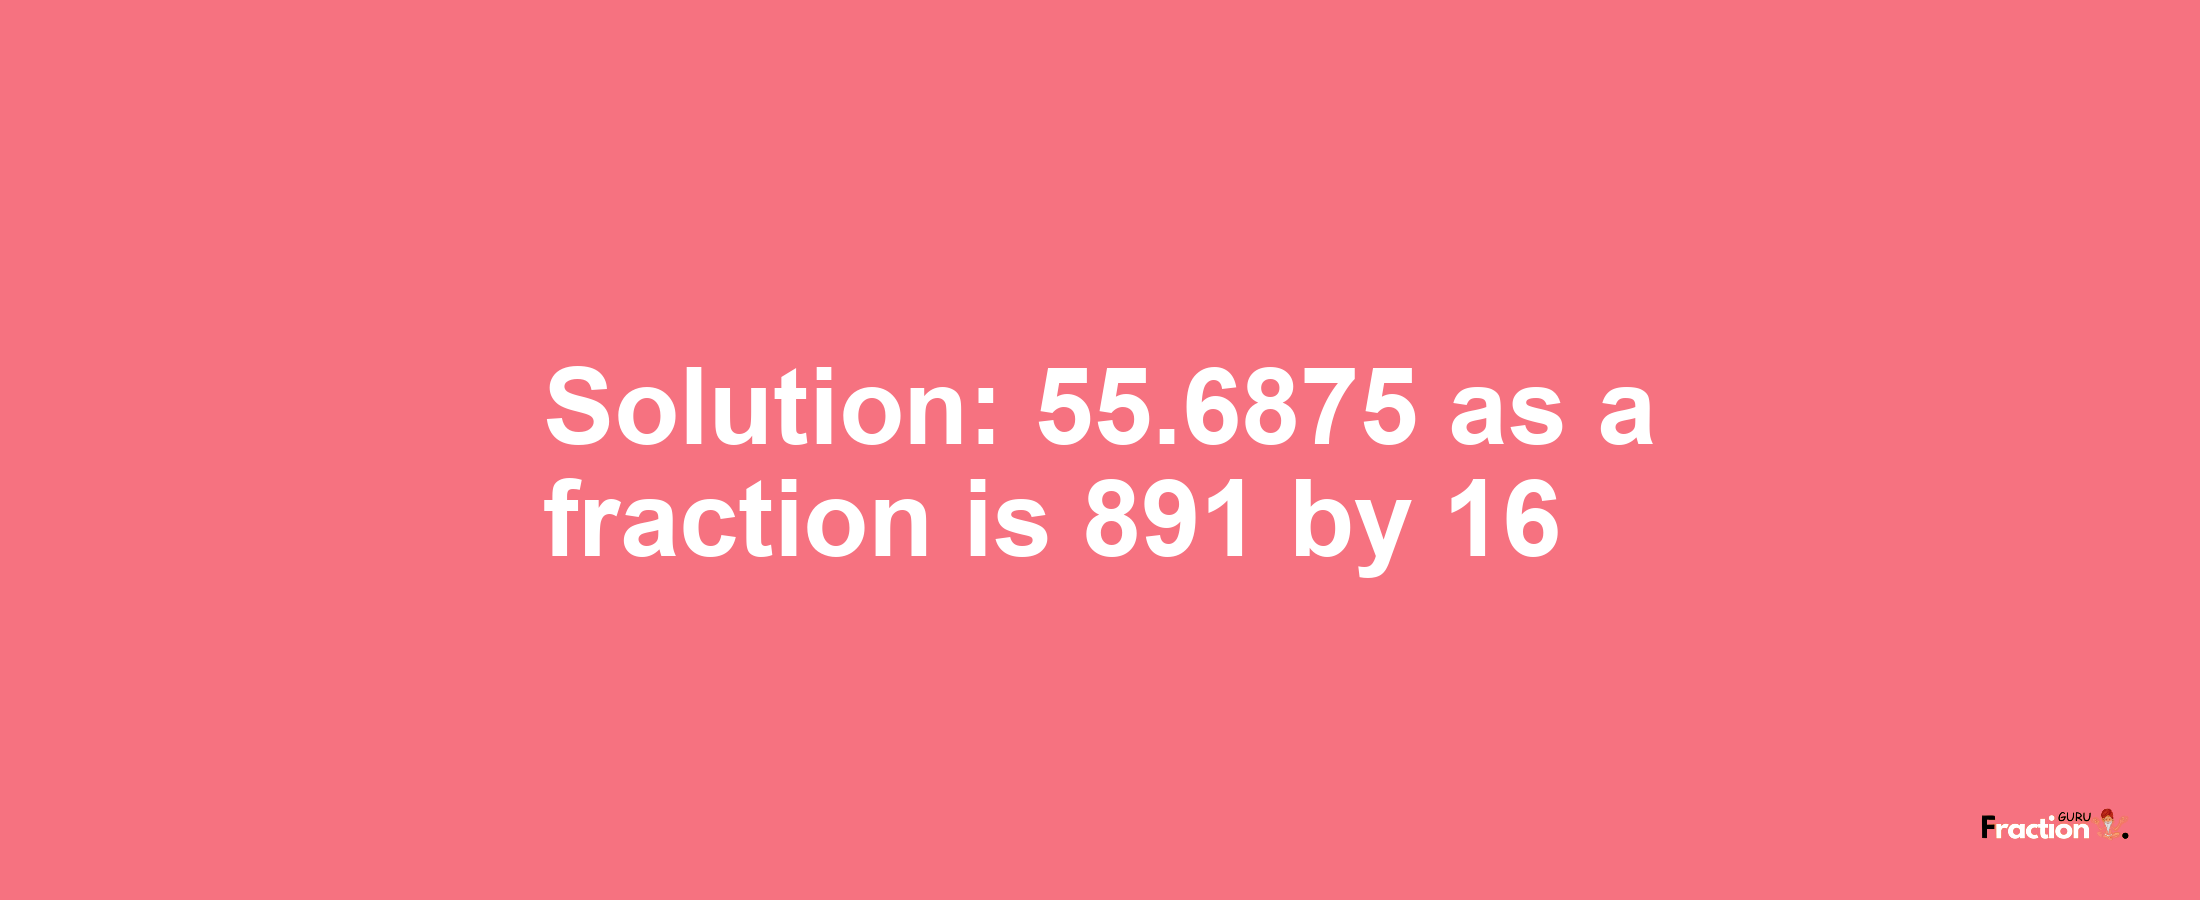 Solution:55.6875 as a fraction is 891/16